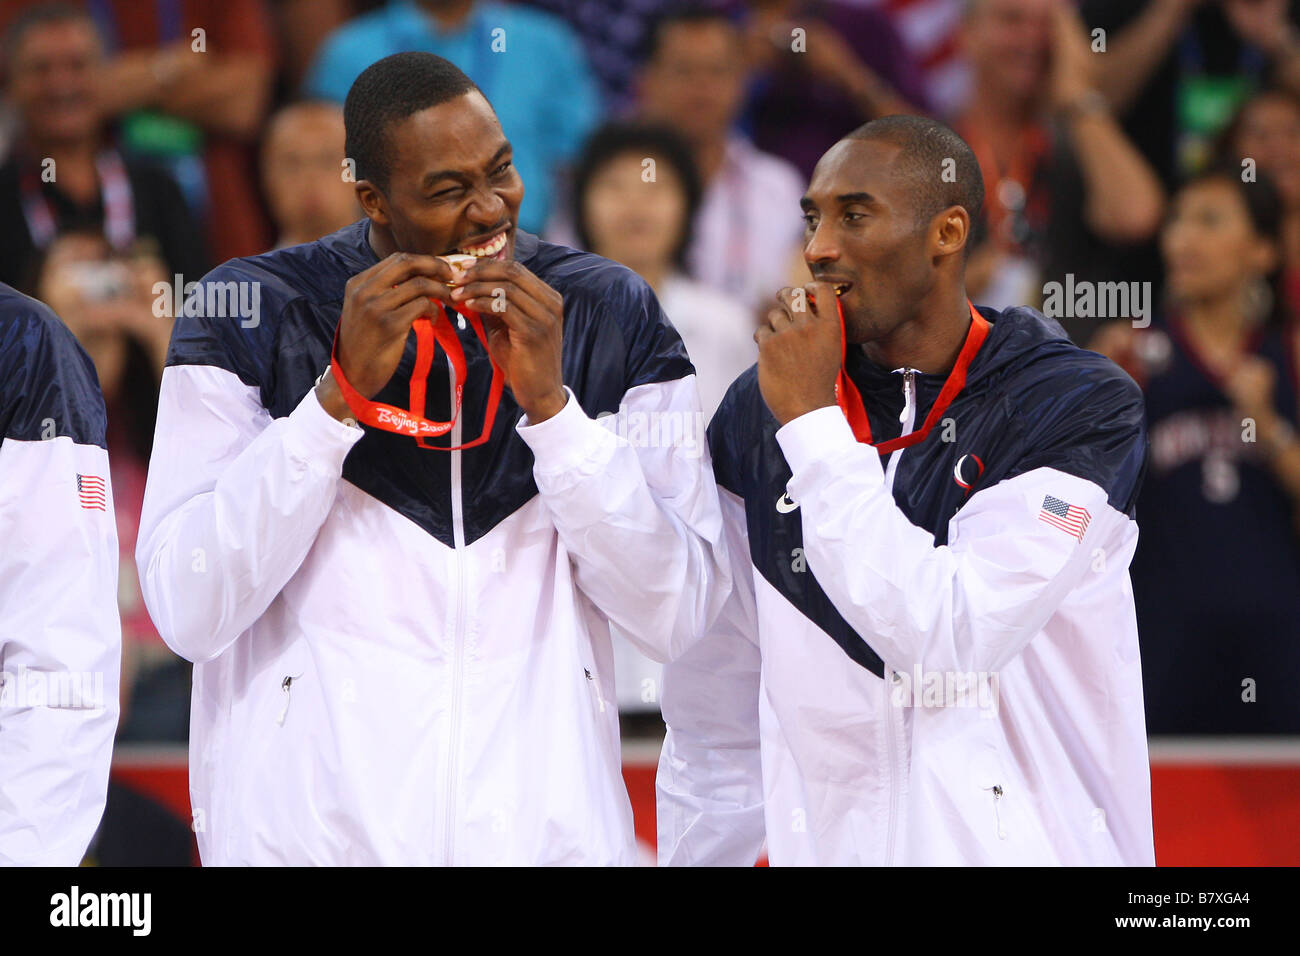 L to R Dwight Howard USA Kobe Bryant USA AUGUST 24 2008 Basketball Beijing 2008 Olympic Games Dwight Howard and Kobe Bryant Cel Stock Photo